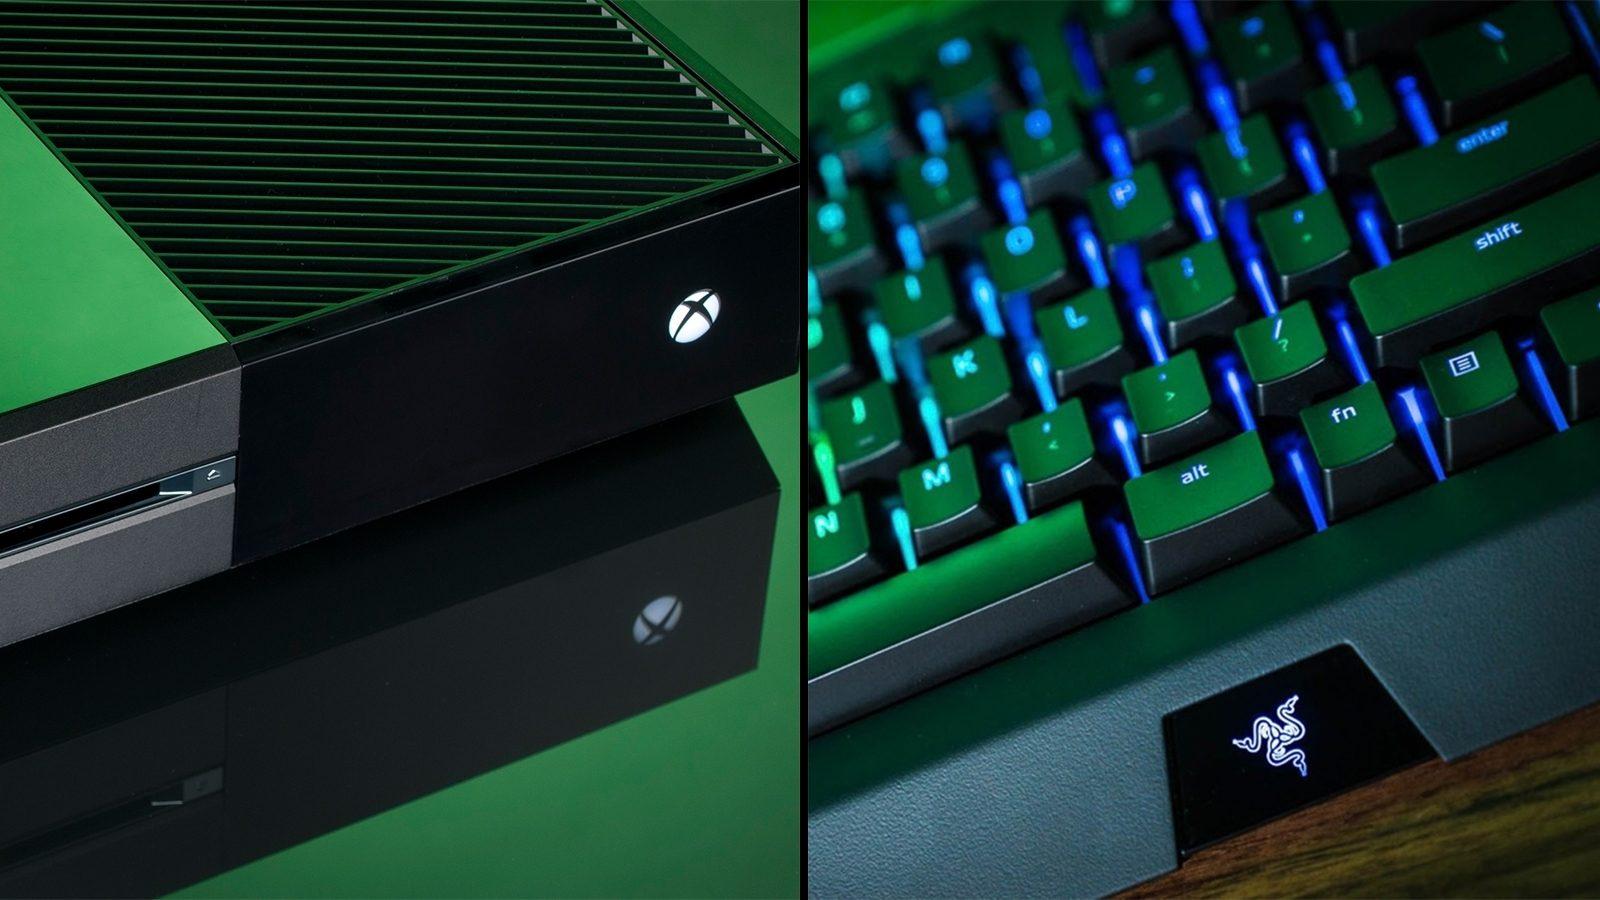 Xbox Cloud Gaming will support keyboard and mouse in future